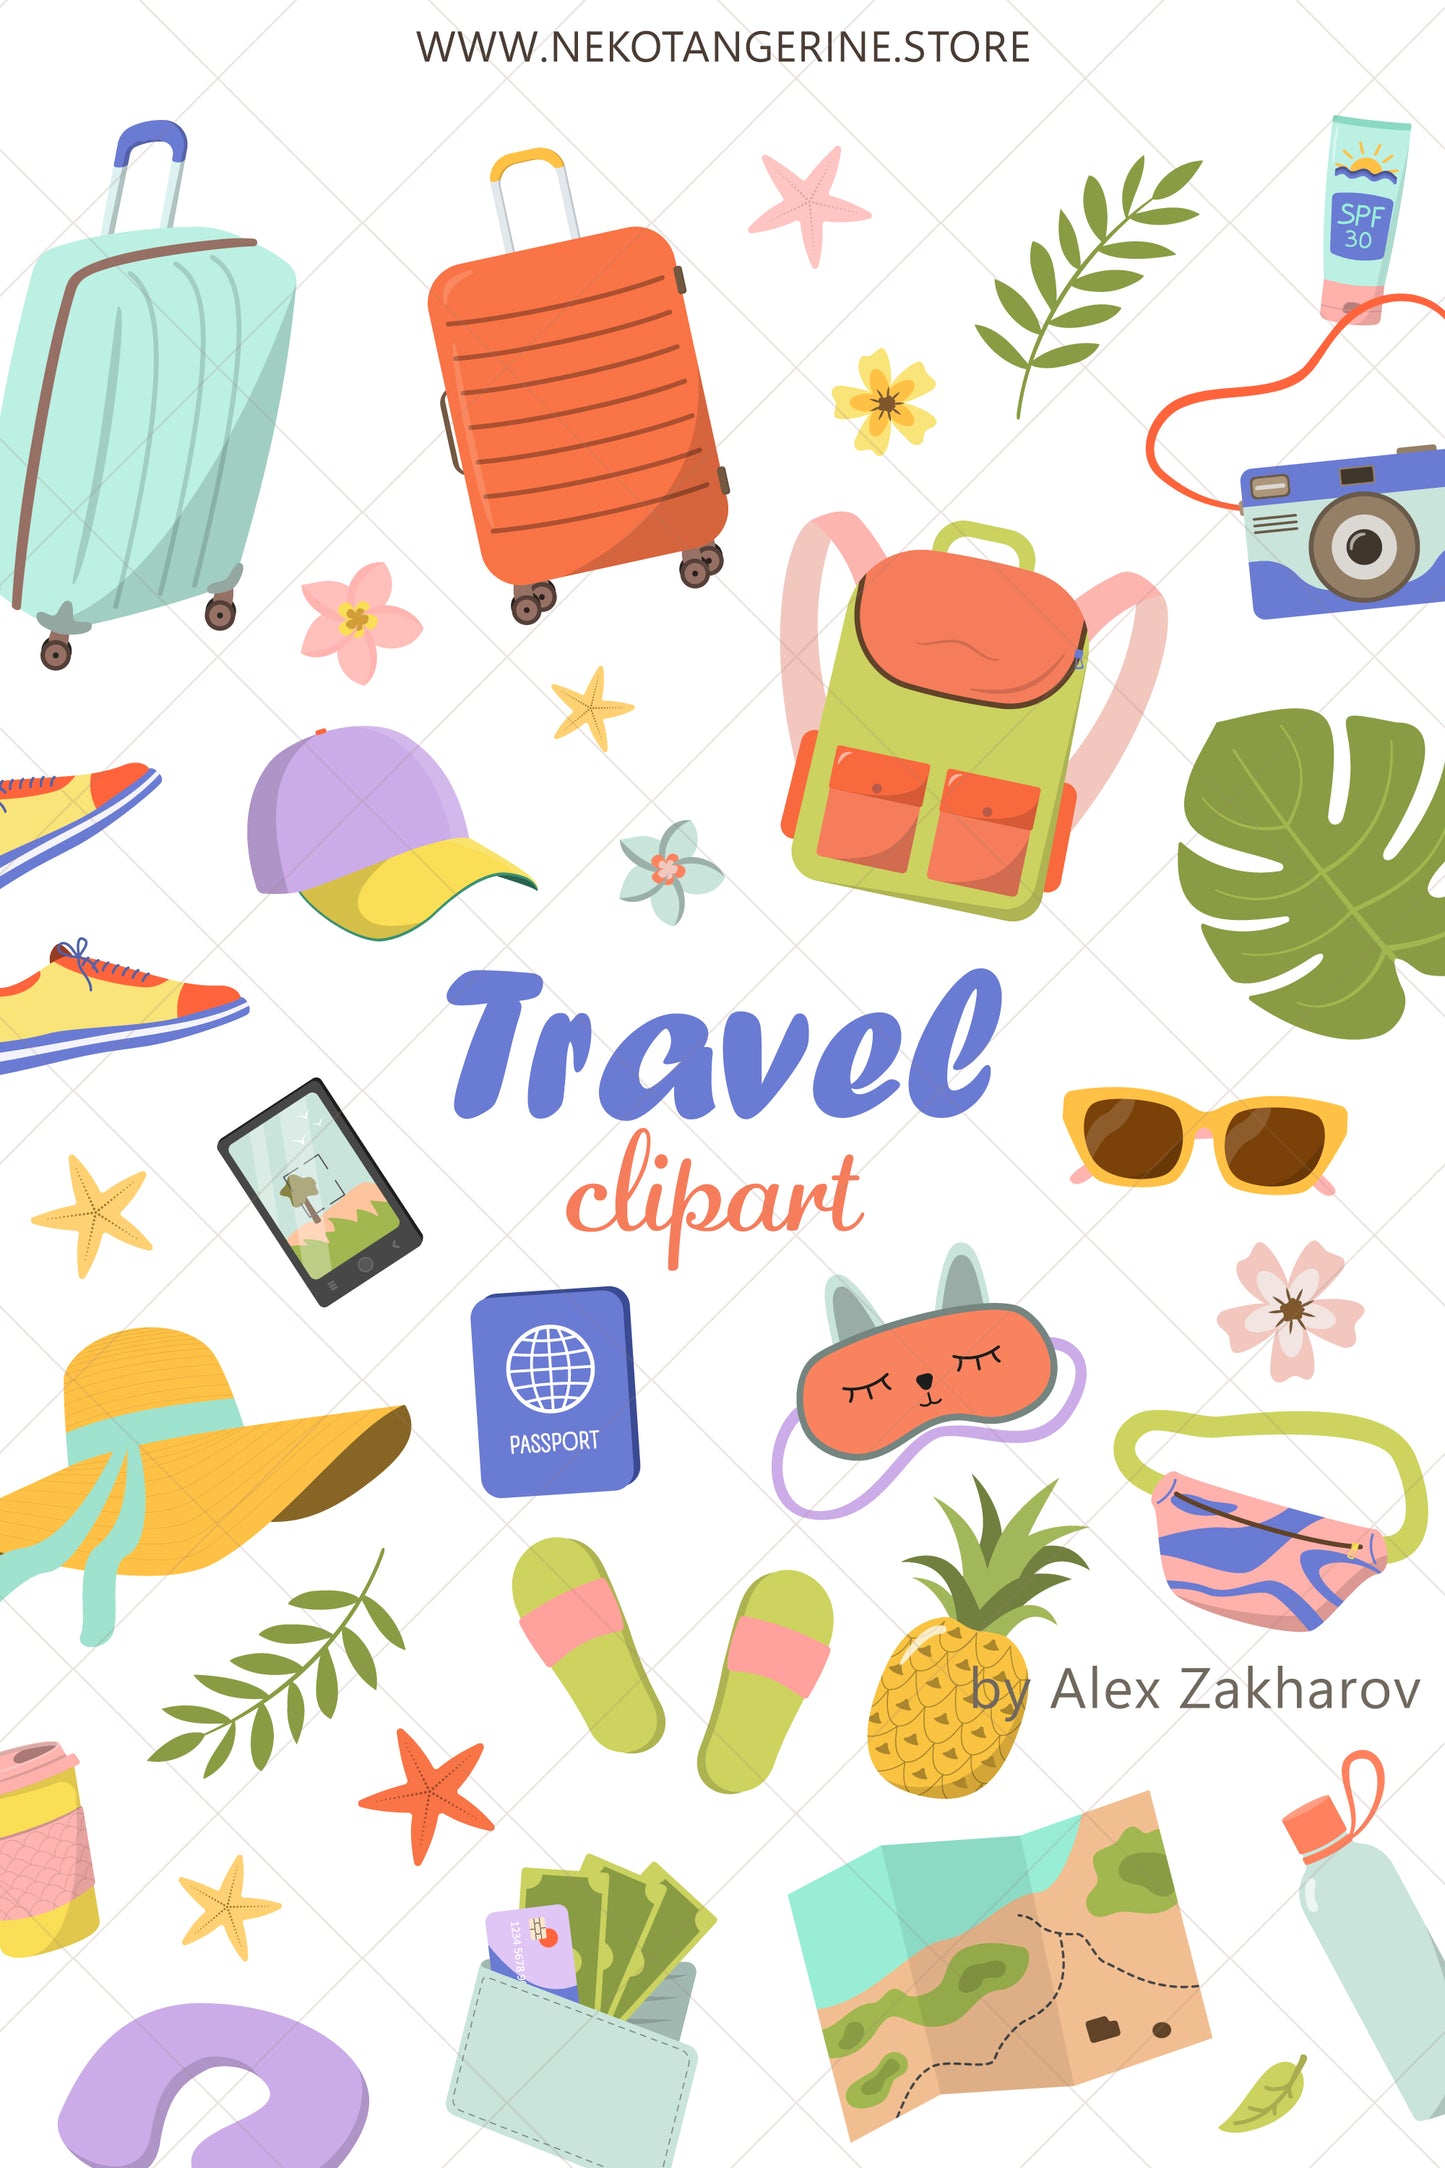 Travel and Vacation Clipart